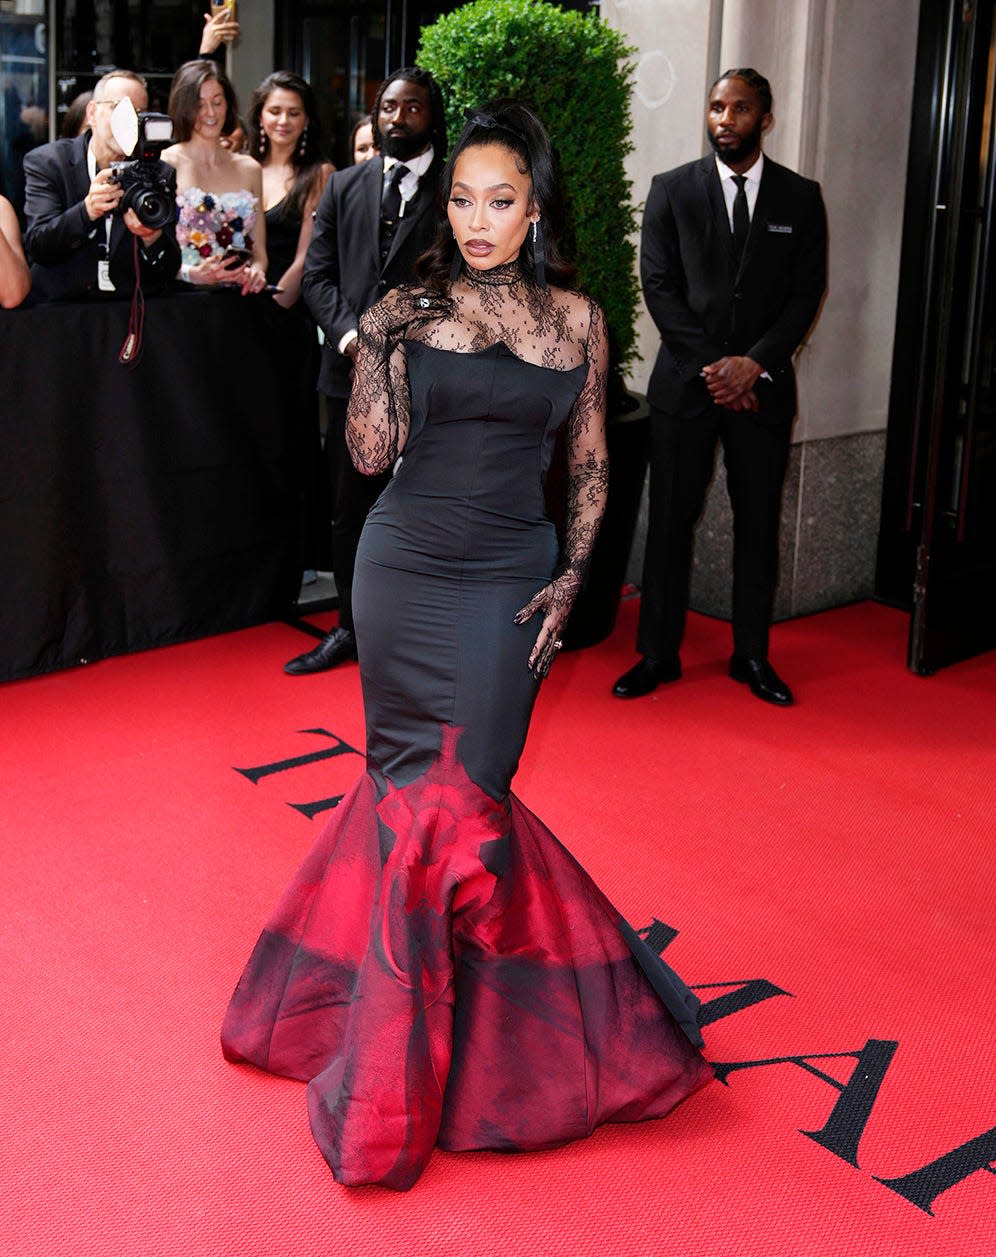 La La Anthony leaves The Mark Hotel for the Met Gala, the annual fundraising gala held for the benefit of the Metropolitan Museum of Art in New York. This year's theme for the gala was 'The Garden of Time.'.